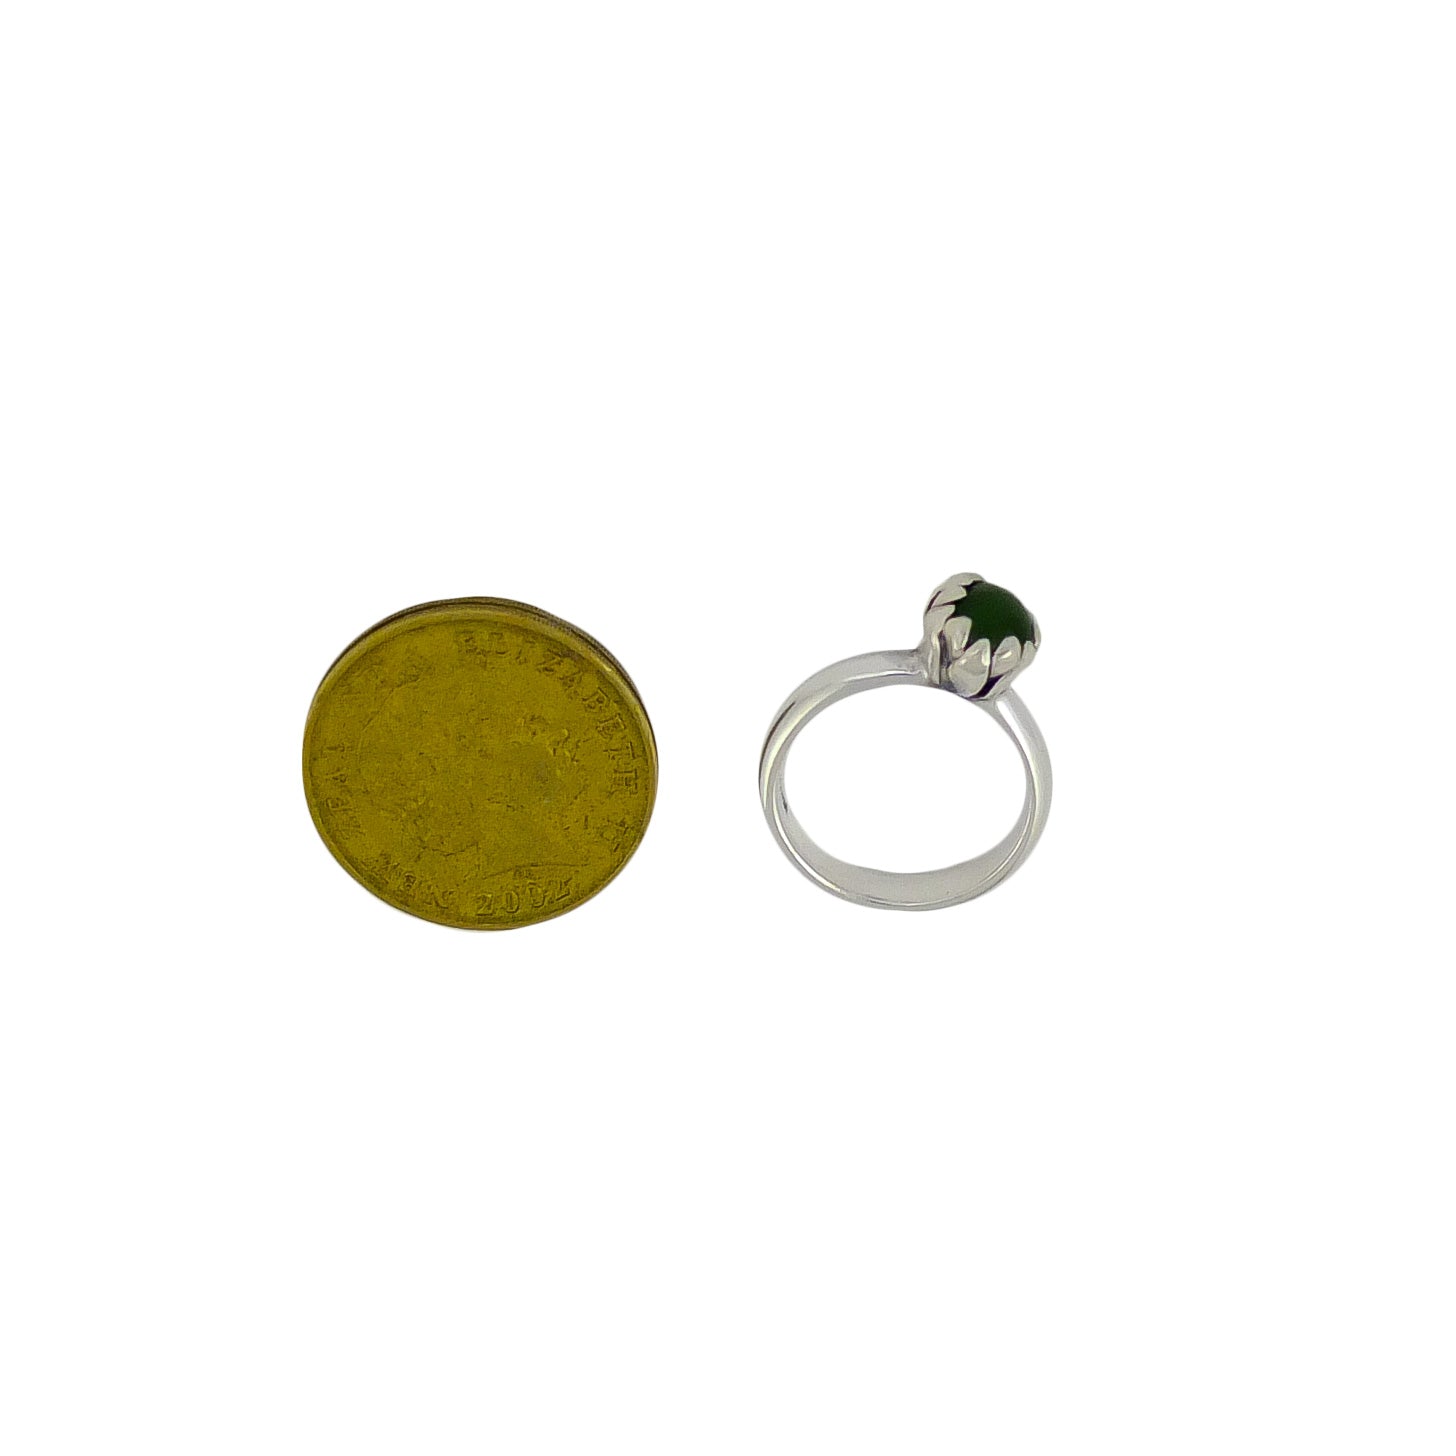 Pounamu Blossom Silver Ring | Redmanuka | nz jewellery top view with 2 dollar coin